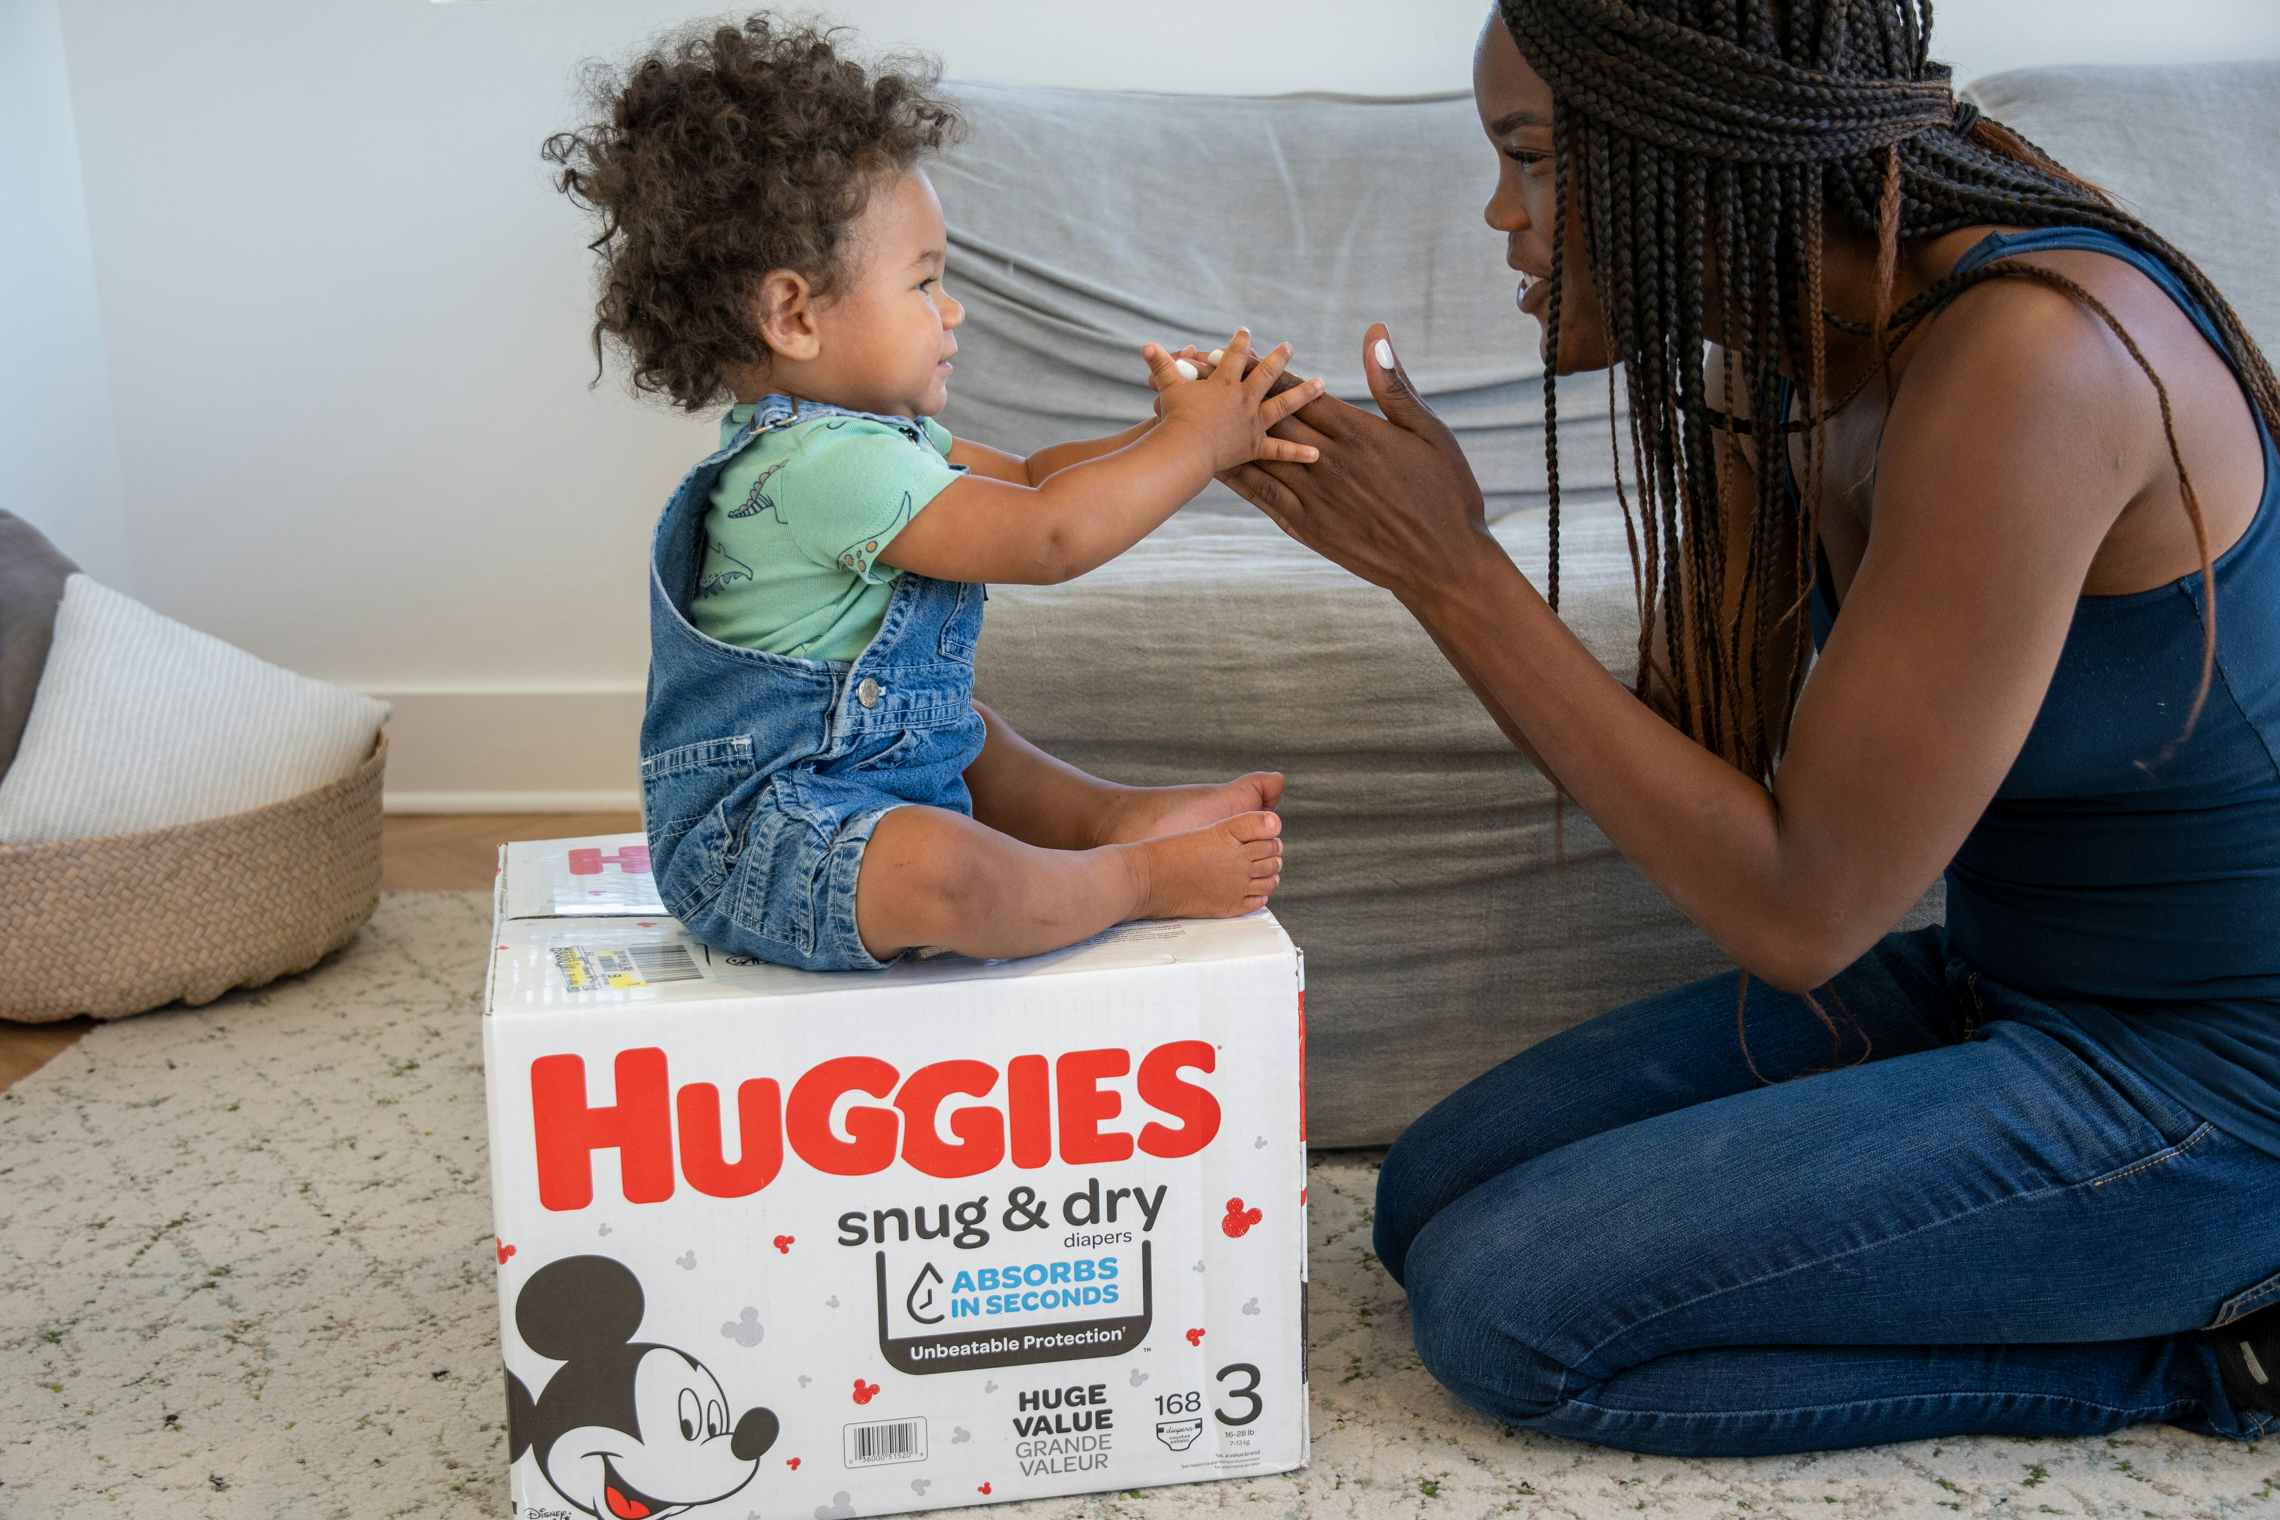 A baby sitting on a Huggies diaper box playing with his mommy.